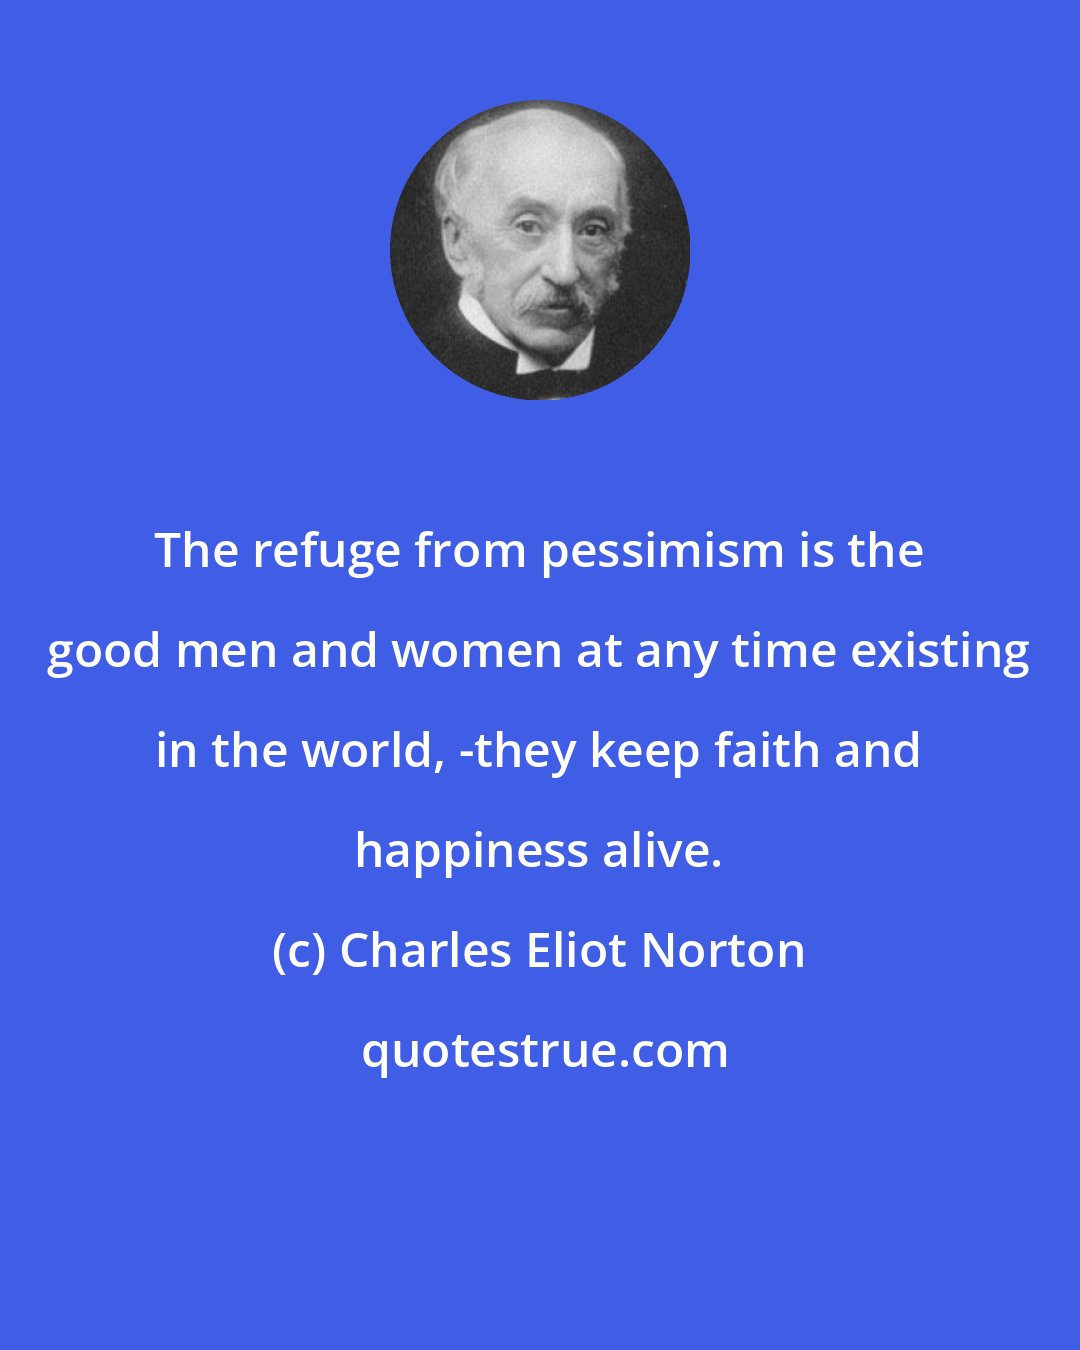 Charles Eliot Norton: The refuge from pessimism is the good men and women at any time existing in the world, -they keep faith and happiness alive.